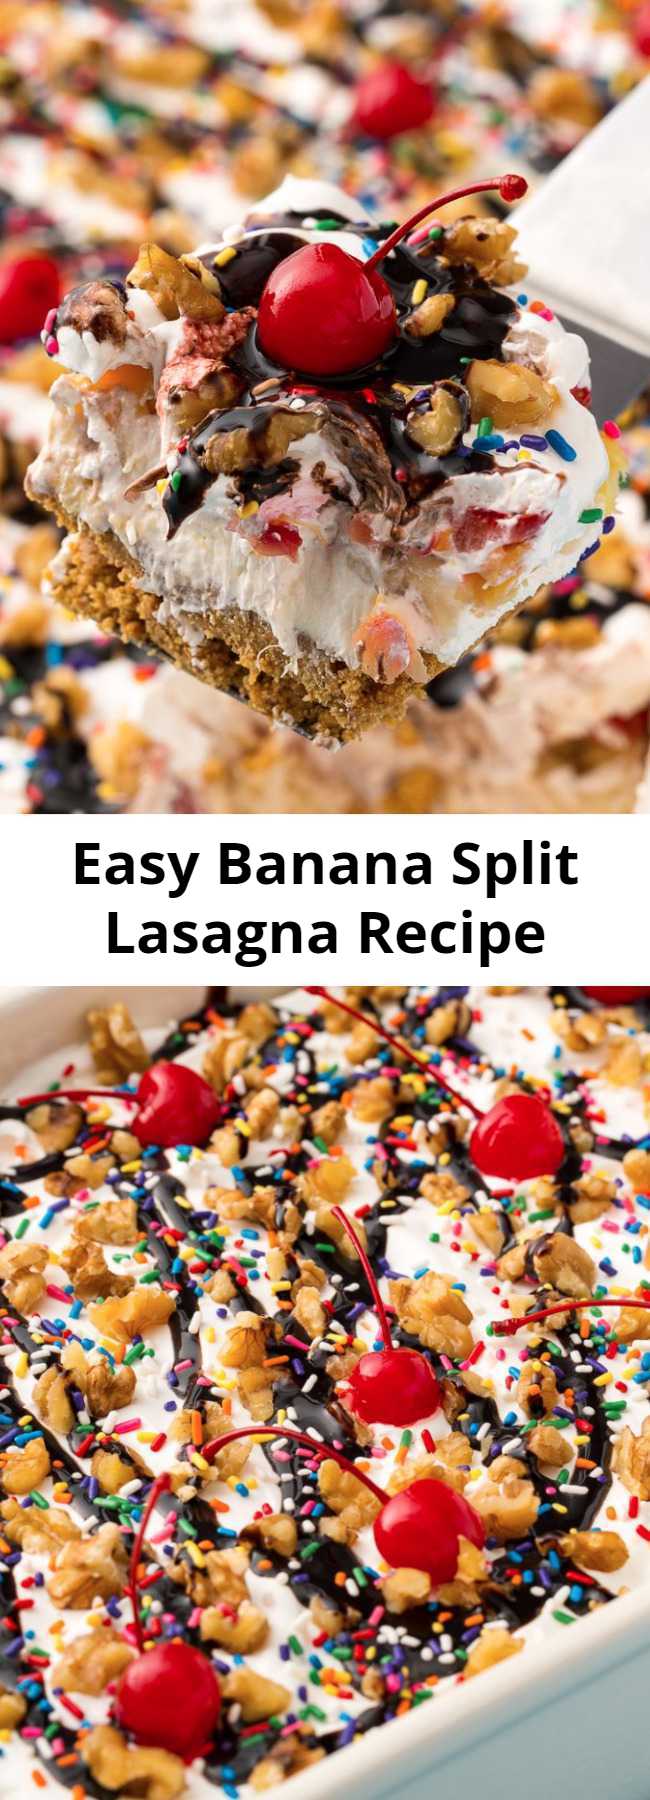 Easy Banana Split Lasagna Recipe - Looking for a fun summer dessert? This Banana Split Lasagna is the best! This no-bake dessert is hands down the most fun way to eat a banana split.